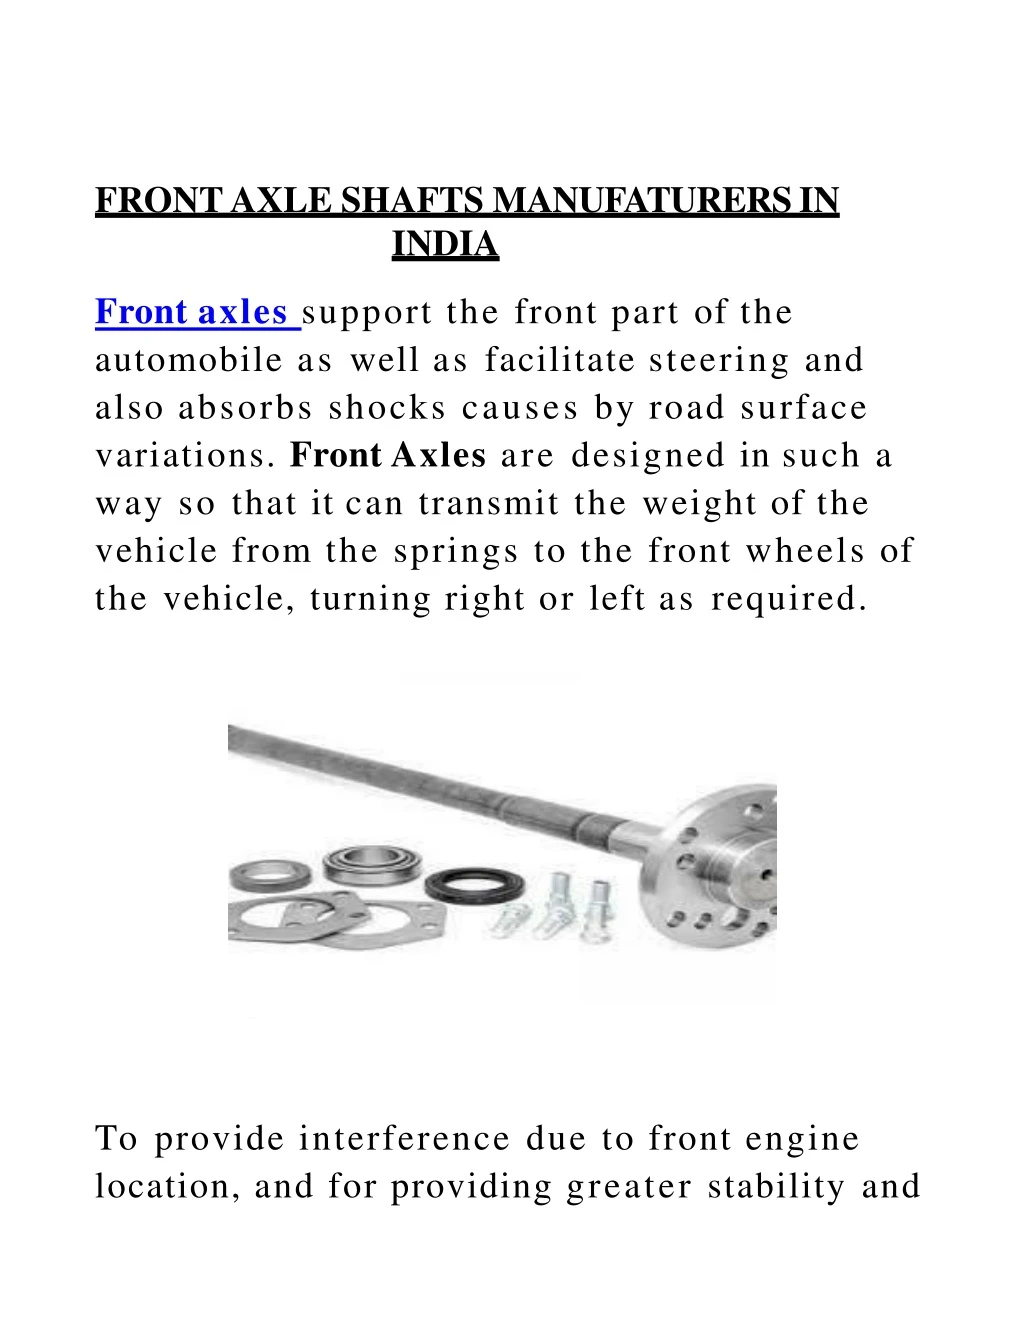 front axle shafts manufaturers in india front